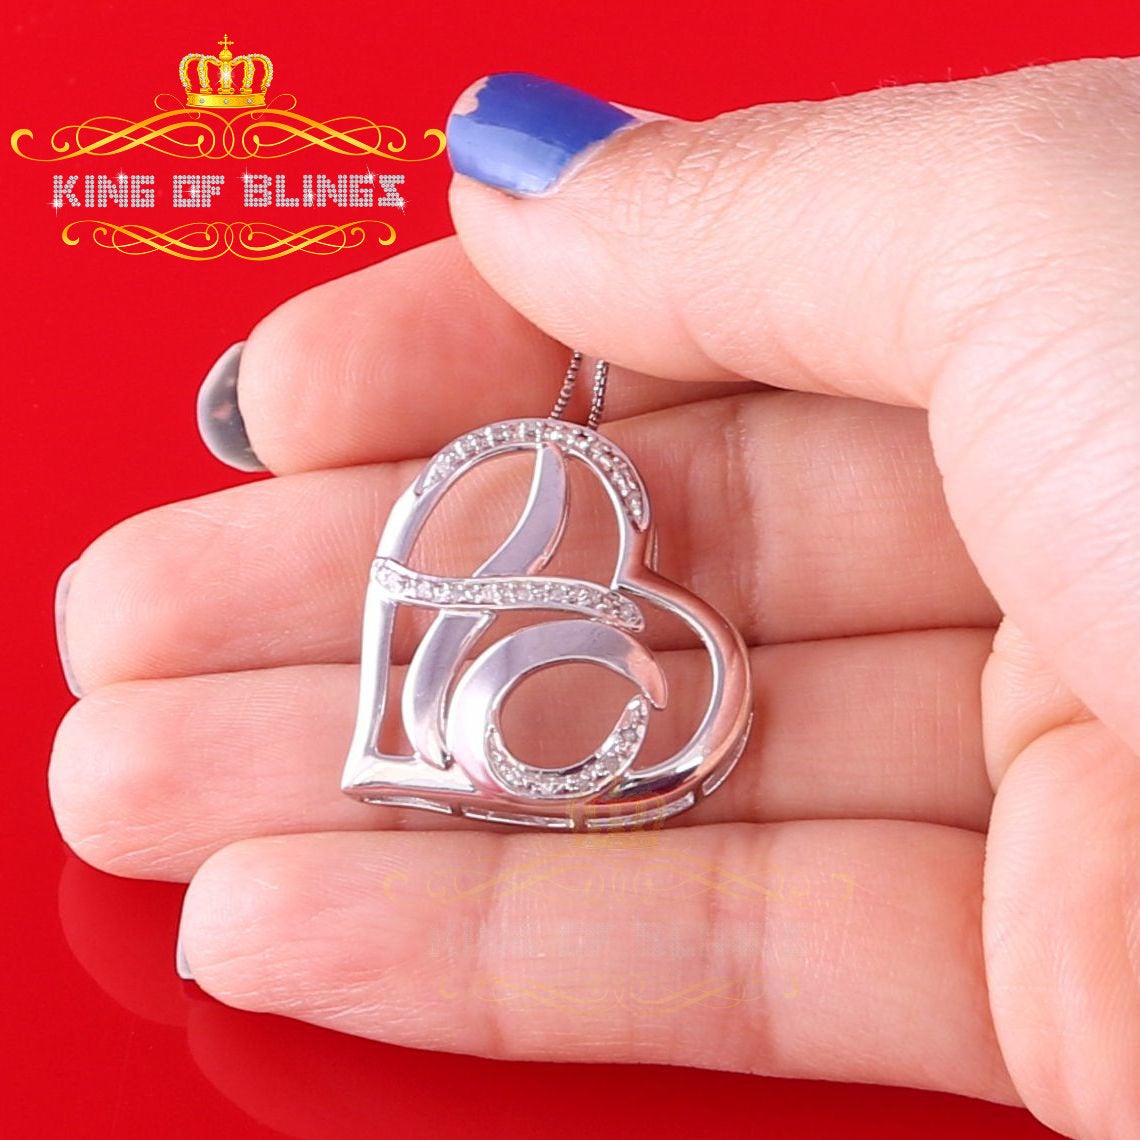 King Of Bling's 0.10ct Real Diamond Valentine Special "HEART" Pendant 925 Sterling Silver White KING OF BLINGS